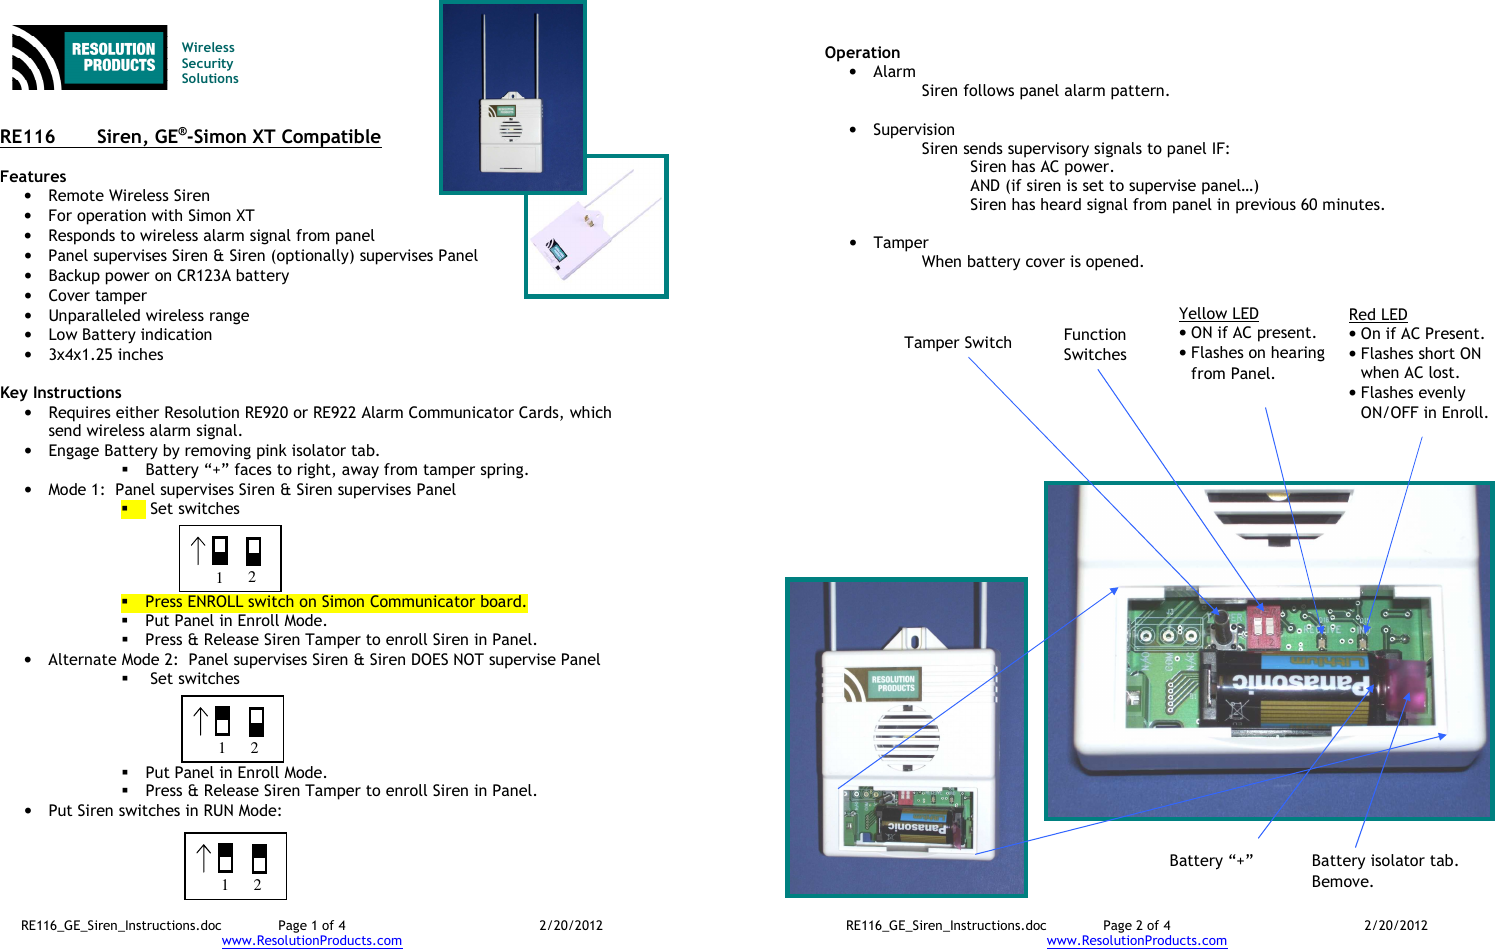 RE116_GE_Siren_Instructions.doc  Page 1 of 4  2/20/2012 www.ResolutionProducts.com   Wireless  Security  Solutions   RE116  Siren, GE®-Simon XT Compatible  Features • Remote Wireless Siren • For operation with Simon XT • Responds to wireless alarm signal from panel • Panel supervises Siren &amp; Siren (optionally) supervises Panel • Backup power on CR123A battery • Cover tamper • Unparalleled wireless range • Low Battery indication • 3x4x1.25 inches  Key Instructions • Requires either Resolution RE920 or RE922 Alarm Communicator Cards, which send wireless alarm signal. • Engage Battery by removing pink isolator tab.  Battery “+” faces to right, away from tamper spring. • Mode 1:  Panel supervises Siren &amp; Siren supervises Panel   Set switches      Press ENROLL switch on Simon Communicator board.  Put Panel in Enroll Mode.  Press &amp; Release Siren Tamper to enroll Siren in Panel. • Alternate Mode 2:  Panel supervises Siren &amp; Siren DOES NOT supervise Panel   Set switches       Put Panel in Enroll Mode.  Press &amp; Release Siren Tamper to enroll Siren in Panel. • Put Siren switches in RUN Mode:  1 2 1 2 1 2 RE116_GE_Siren_Instructions.doc  Page 2 of 4  2/20/2012 www.ResolutionProducts.com  Operation • Alarm Siren follows panel alarm pattern.  • Supervision Siren sends supervisory signals to panel IF: Siren has AC power. AND (if siren is set to supervise panel…) Siren has heard signal from panel in previous 60 minutes.  • Tamper When battery cover is opened. Tamper Switch Function Switches Yellow LED • ON if AC present. • Flashes on hearing from Panel. Red LED • On if AC Present. • Flashes short ON when AC lost. • Flashes evenly ON/OFF in Enroll. Battery “+” Battery isolator tab. Bemove. 